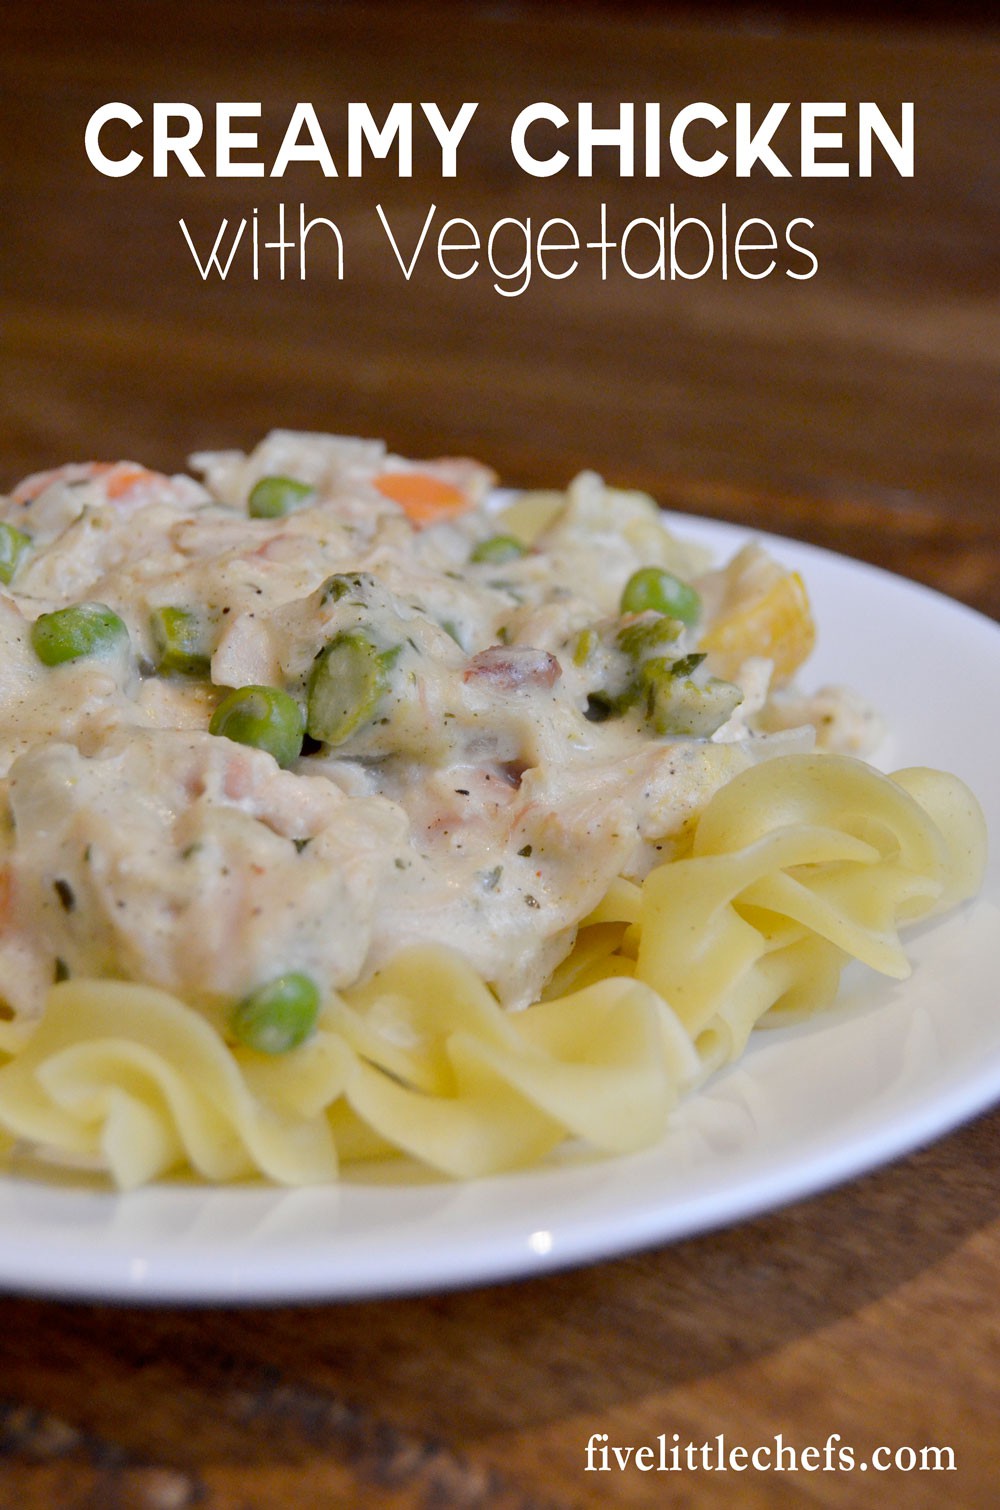 One dish Creamy Chicken with Vegetables recipe is quick to pull together. Serve it over wide egg noodles. Done in 30 minutes or less!